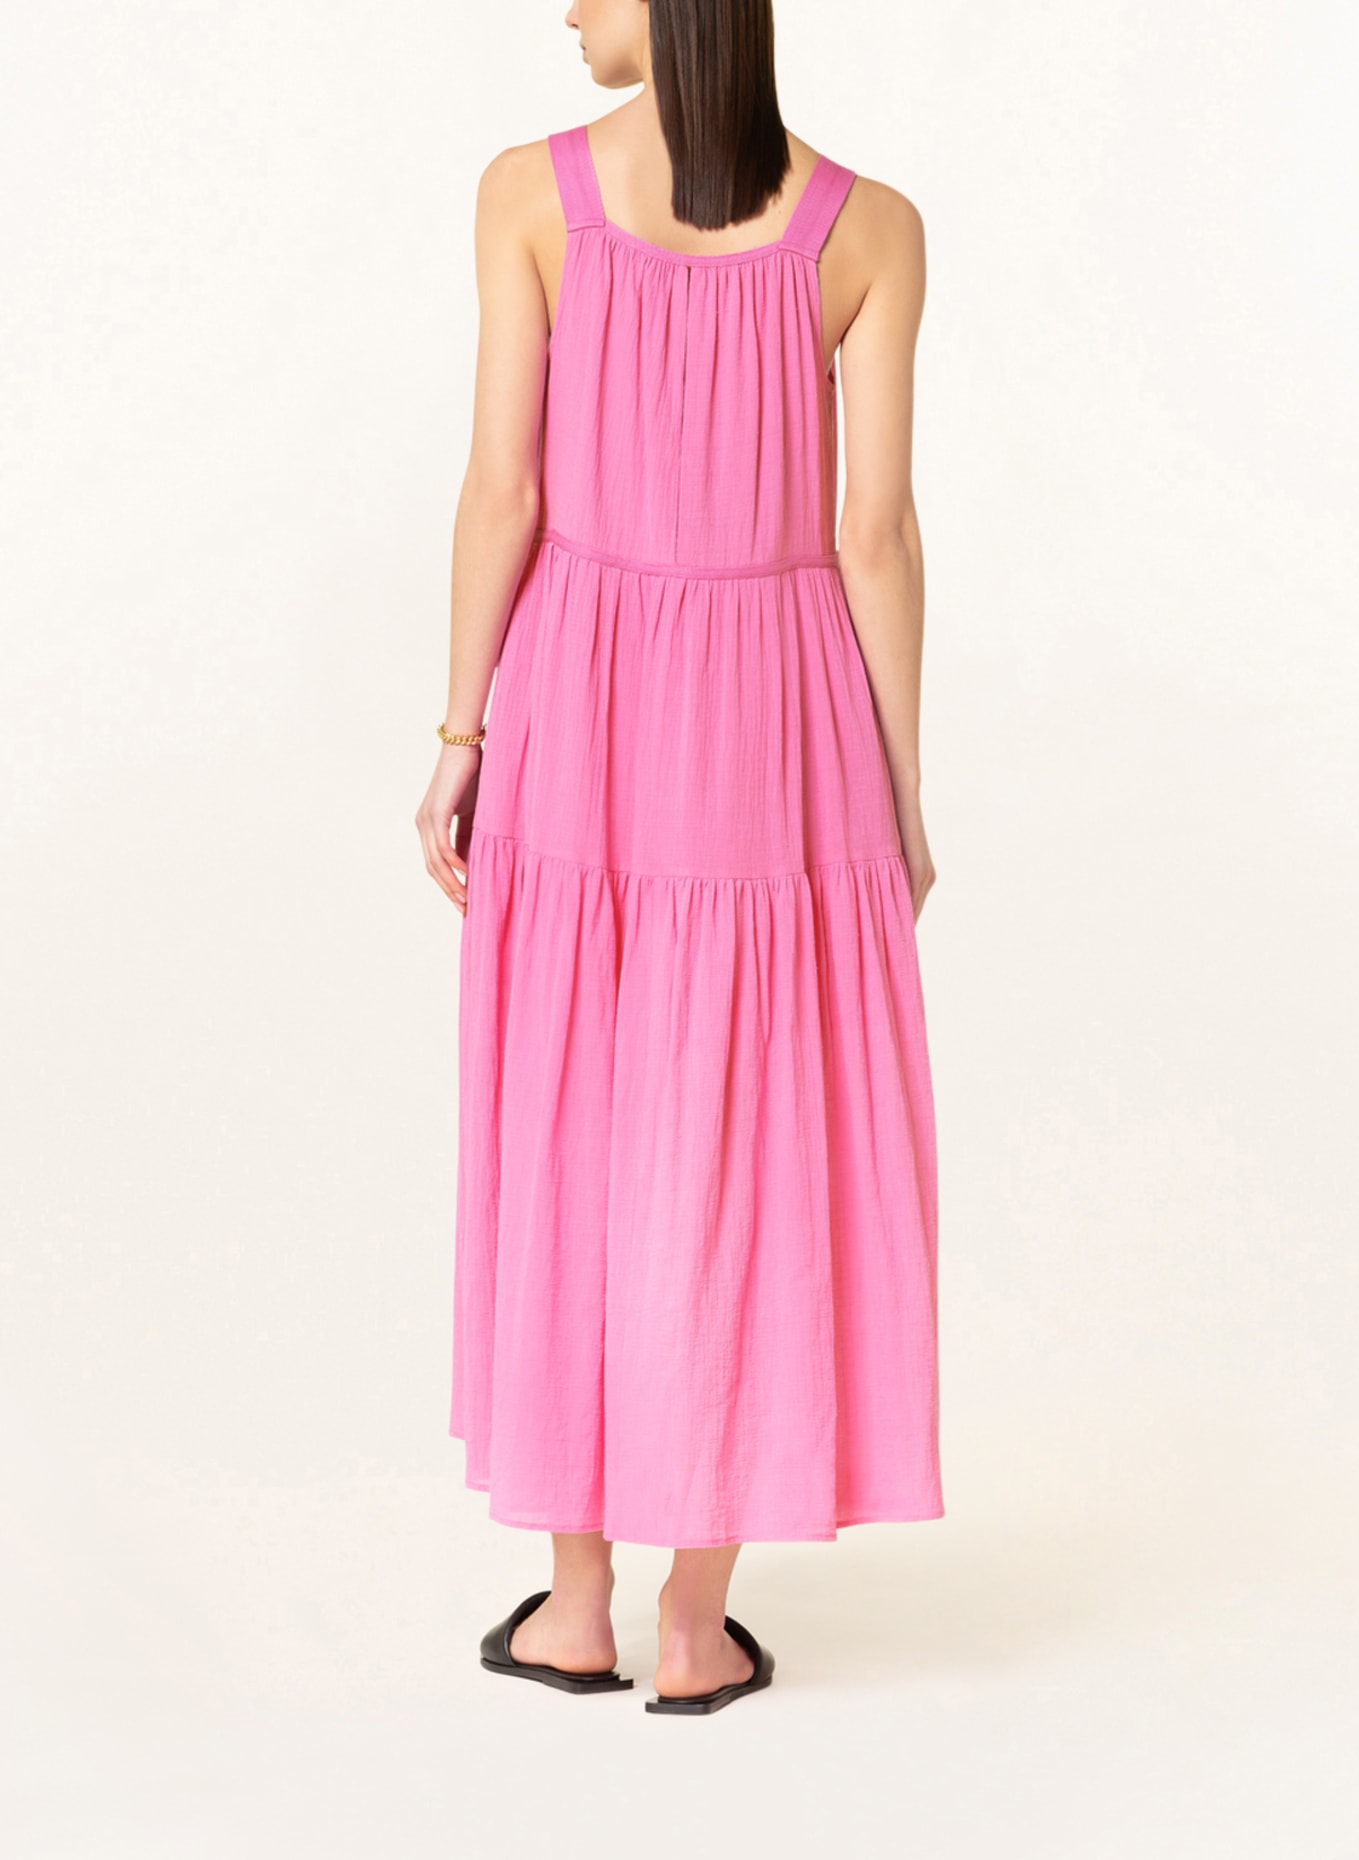 RIANI Dress with cut-out, Color: PINK (Image 3)